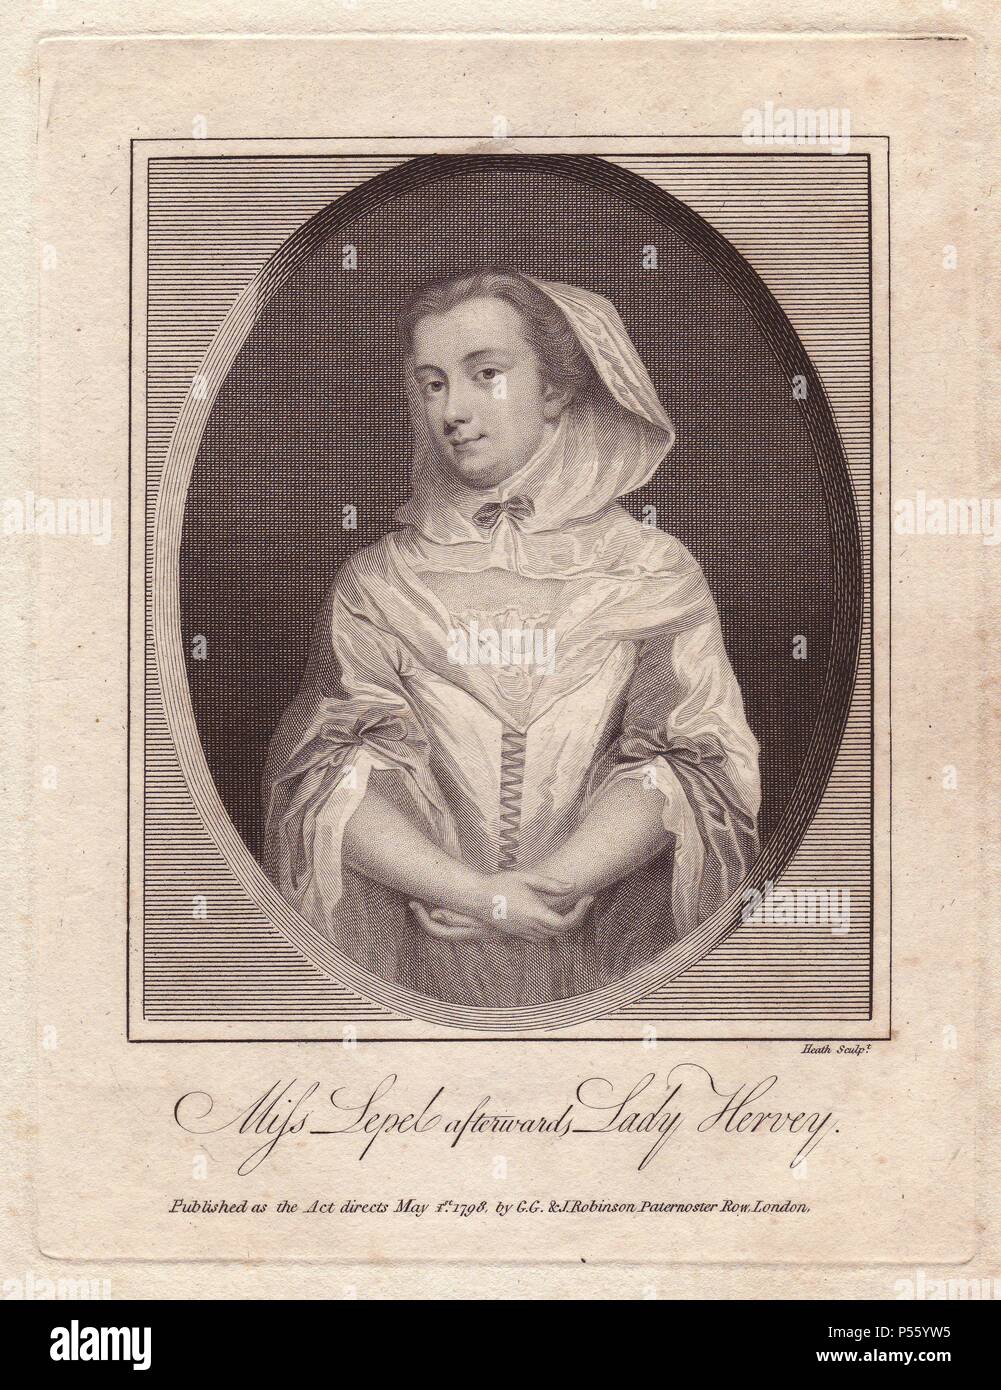 Miss Mary Lepel (1700-1768), maid of honour to the court of George I, a famous beauty and conversationalist, later Lady Hervey.. Copperplate portrait engraved by Heath, published in 1798. Stock Photo